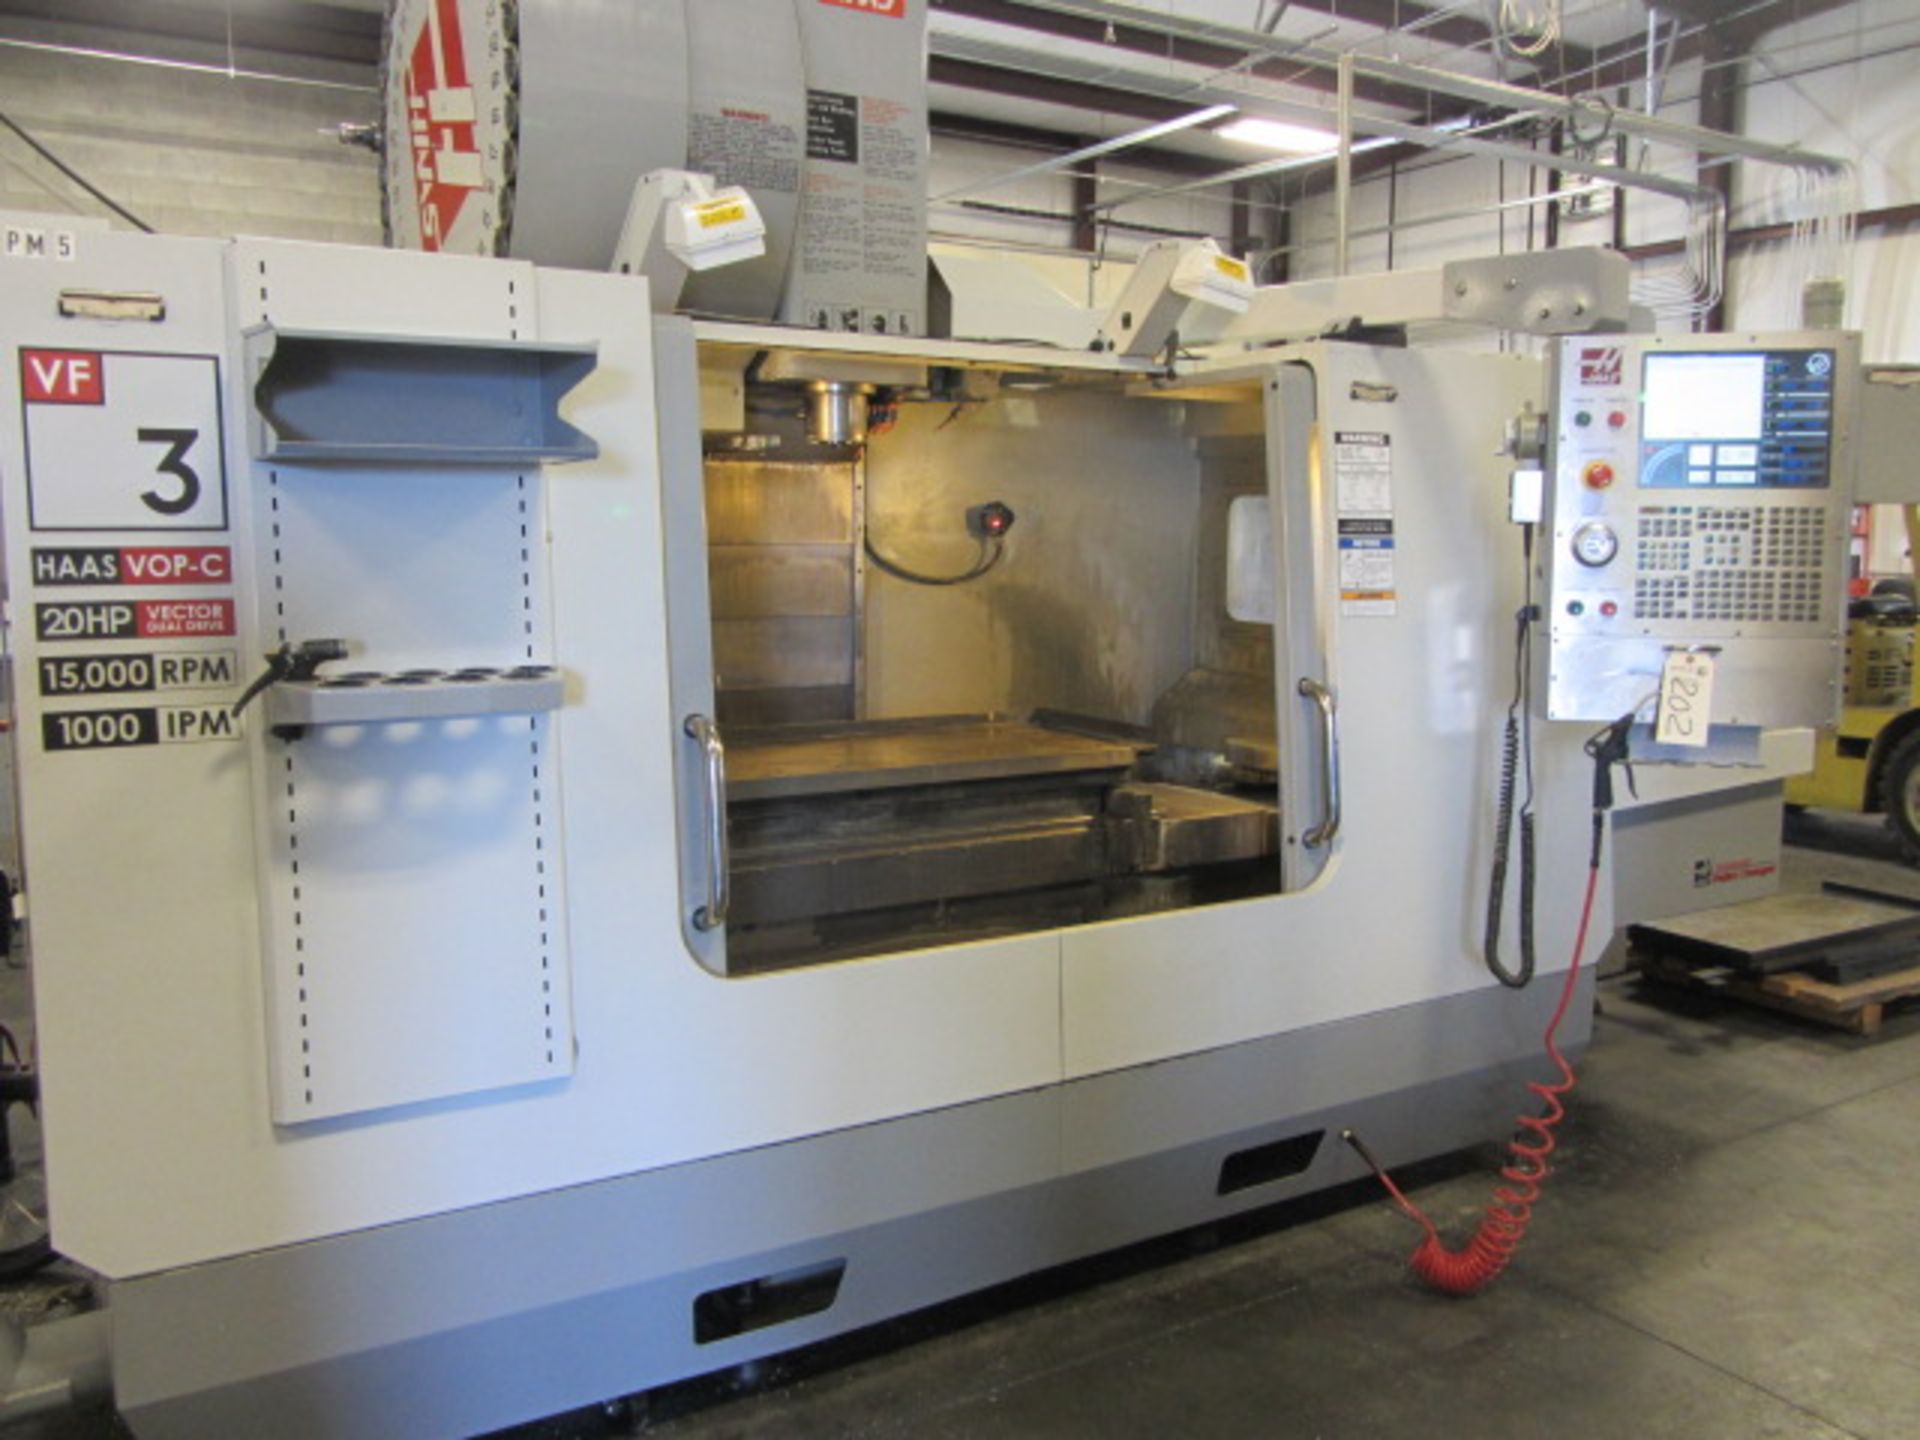 Haas VF3DAPC 4-Axis CNC Vertical Machining Center with Dual Pallet Changer, Intuitive Probing, - Image 4 of 10